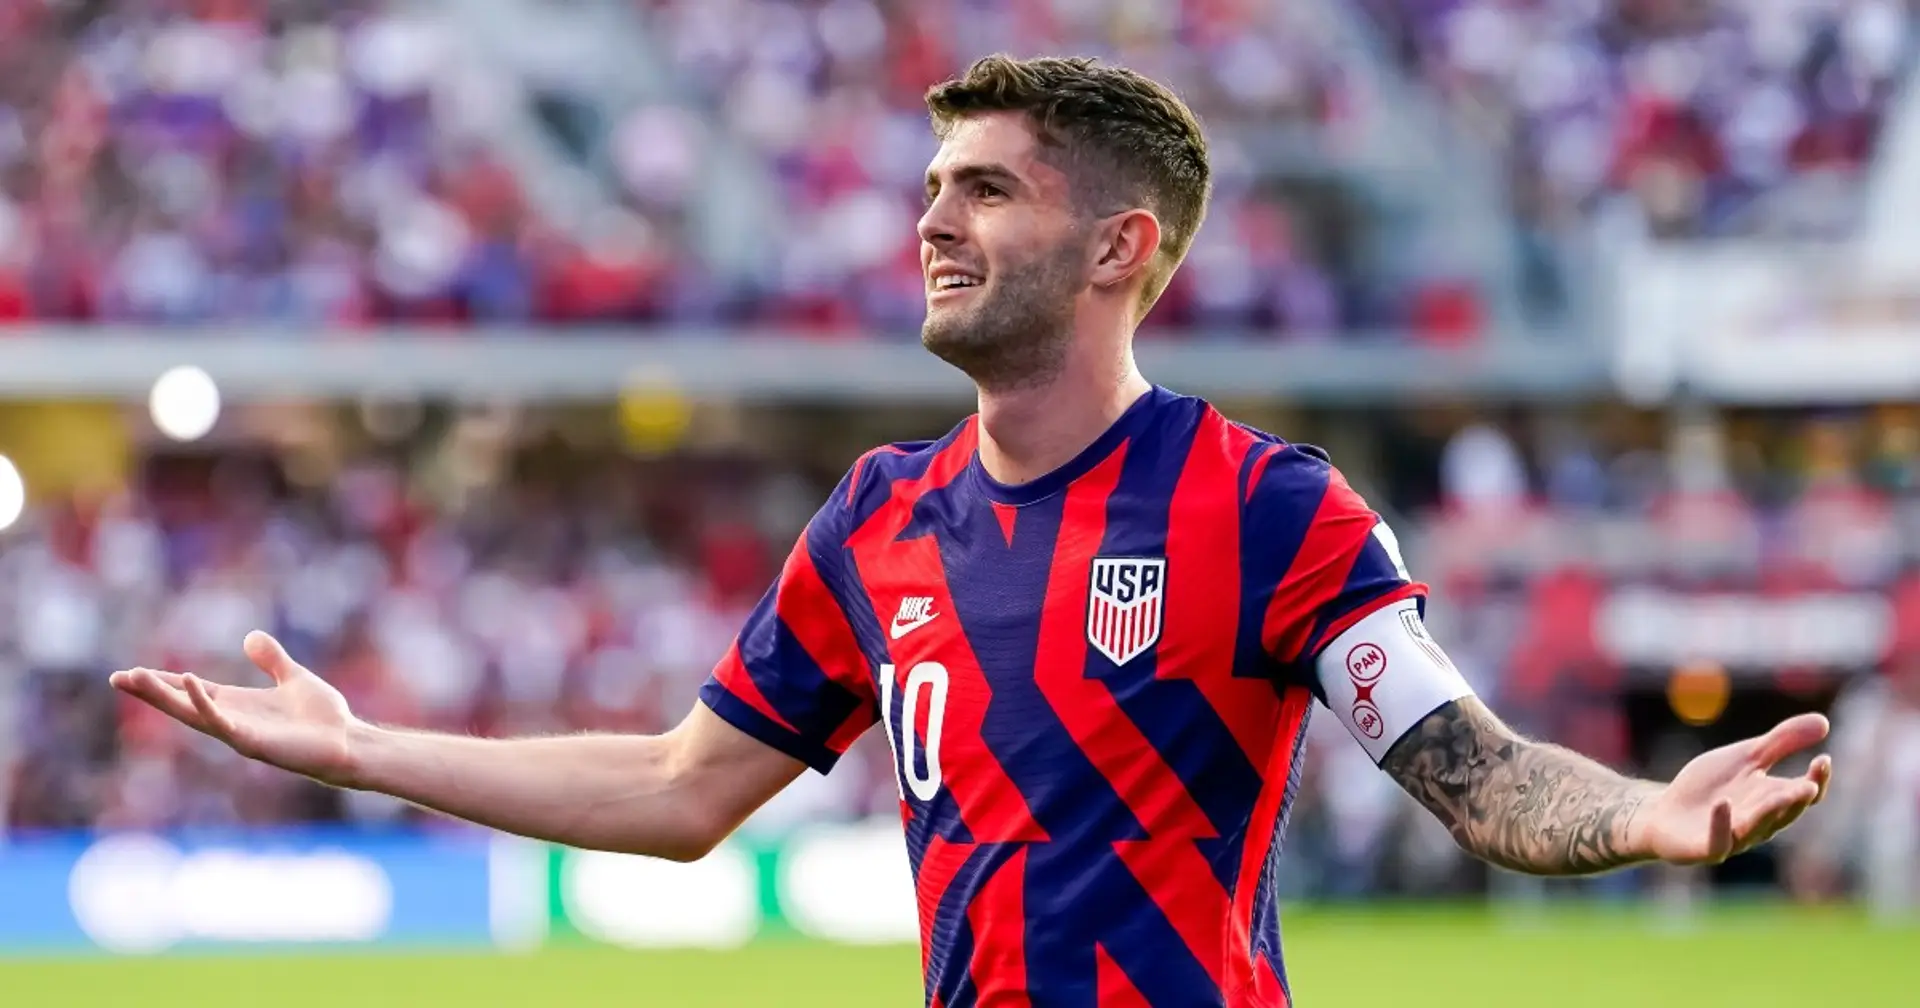 Major Christian Pulisic update & 2 more big Arsenal stories you might've missed